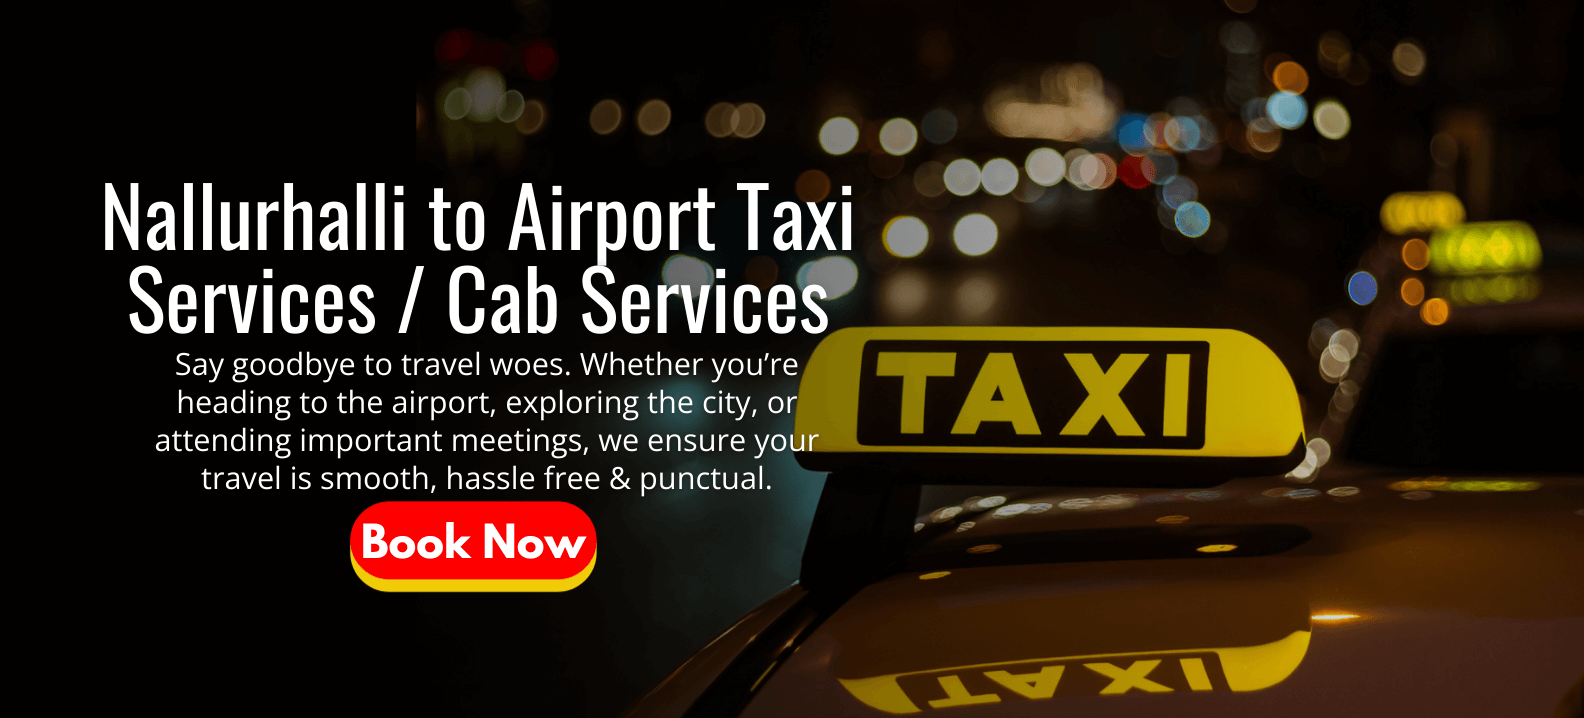 Nallurhalli to Airport Taxi Services _ Cab Services